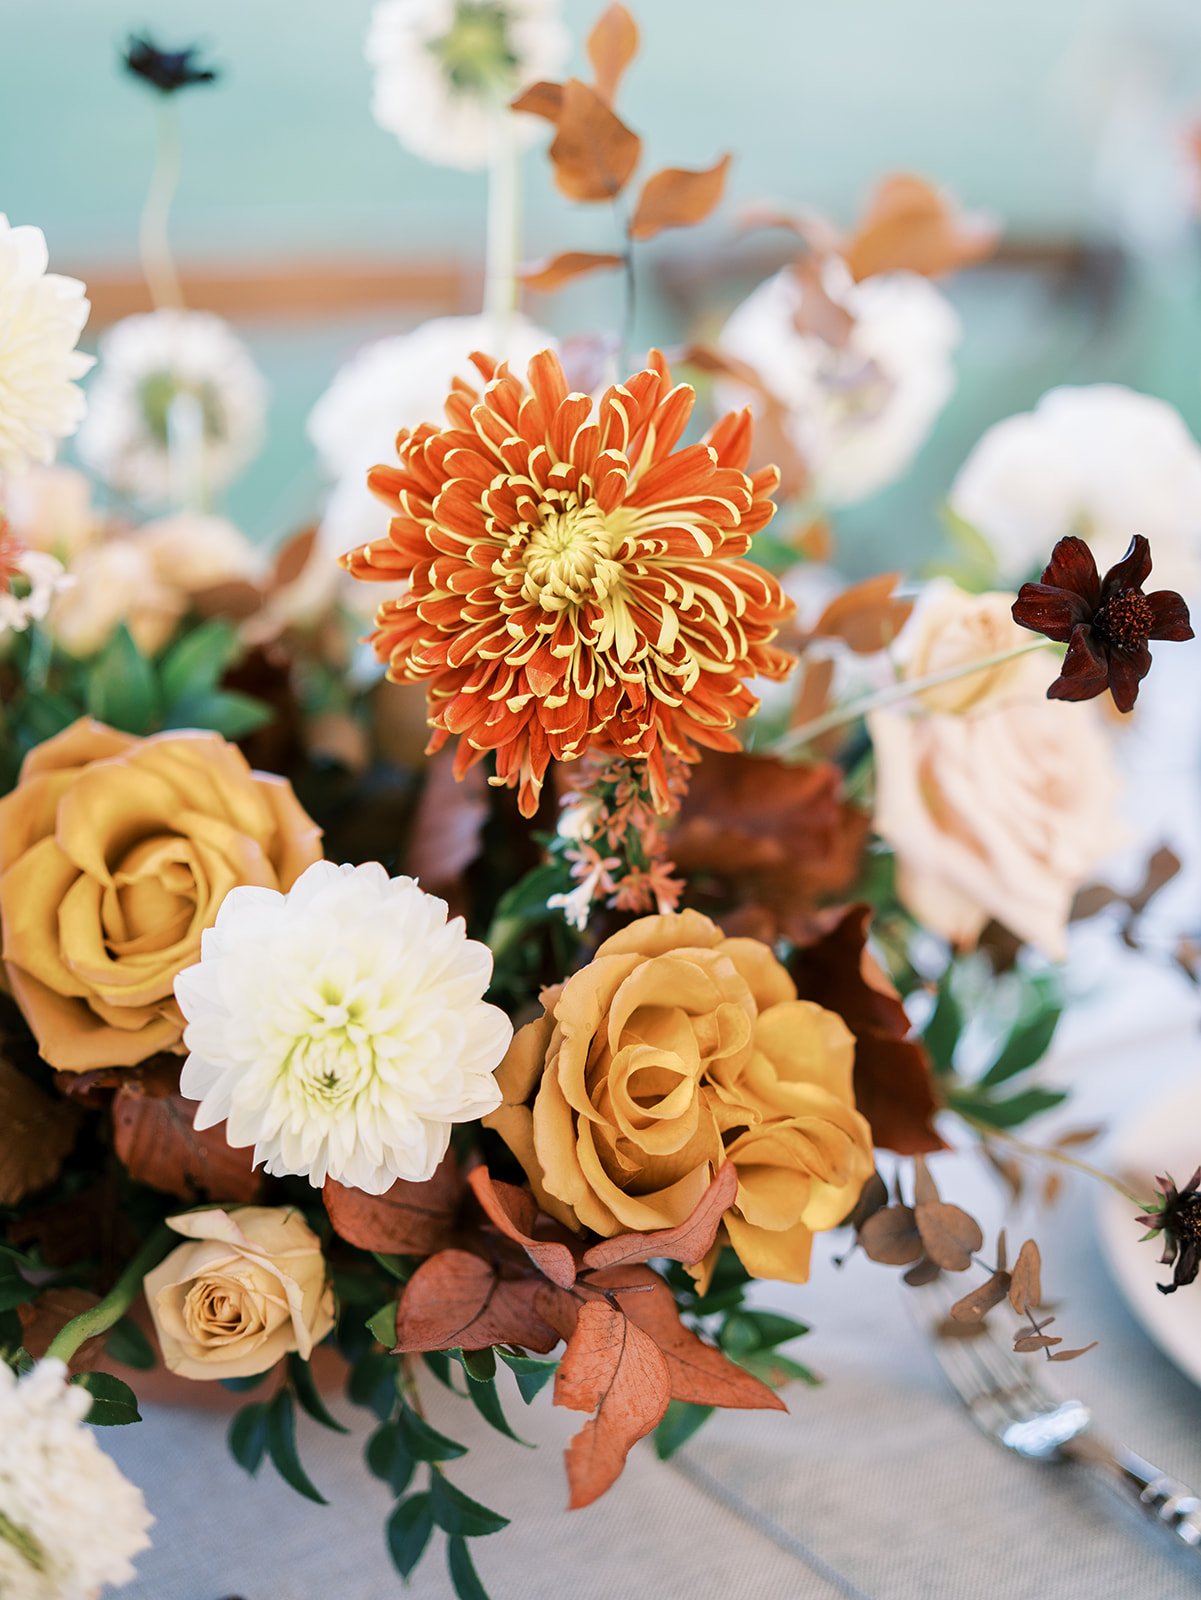 Orange and red wedding flowers at outdoor tented wedding by Shannon Rose Events